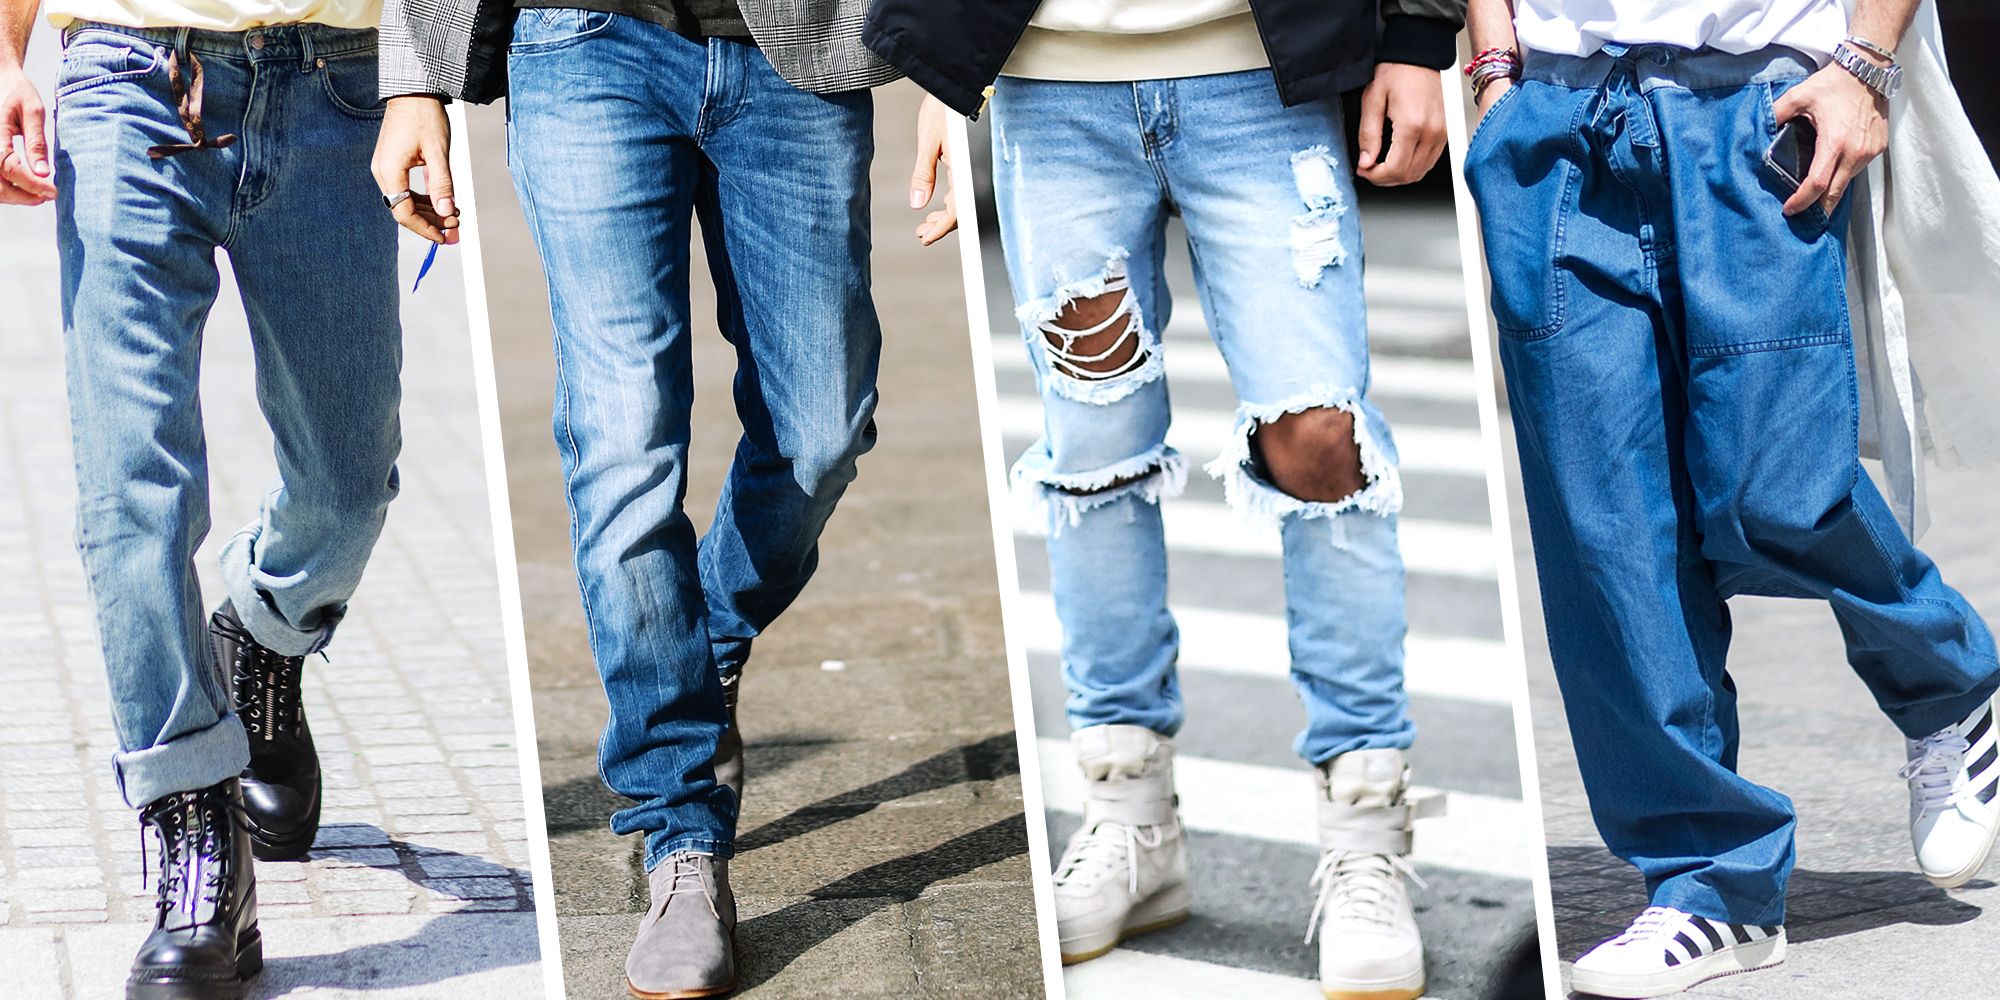 Mens' Jeans Style & Fit Guide